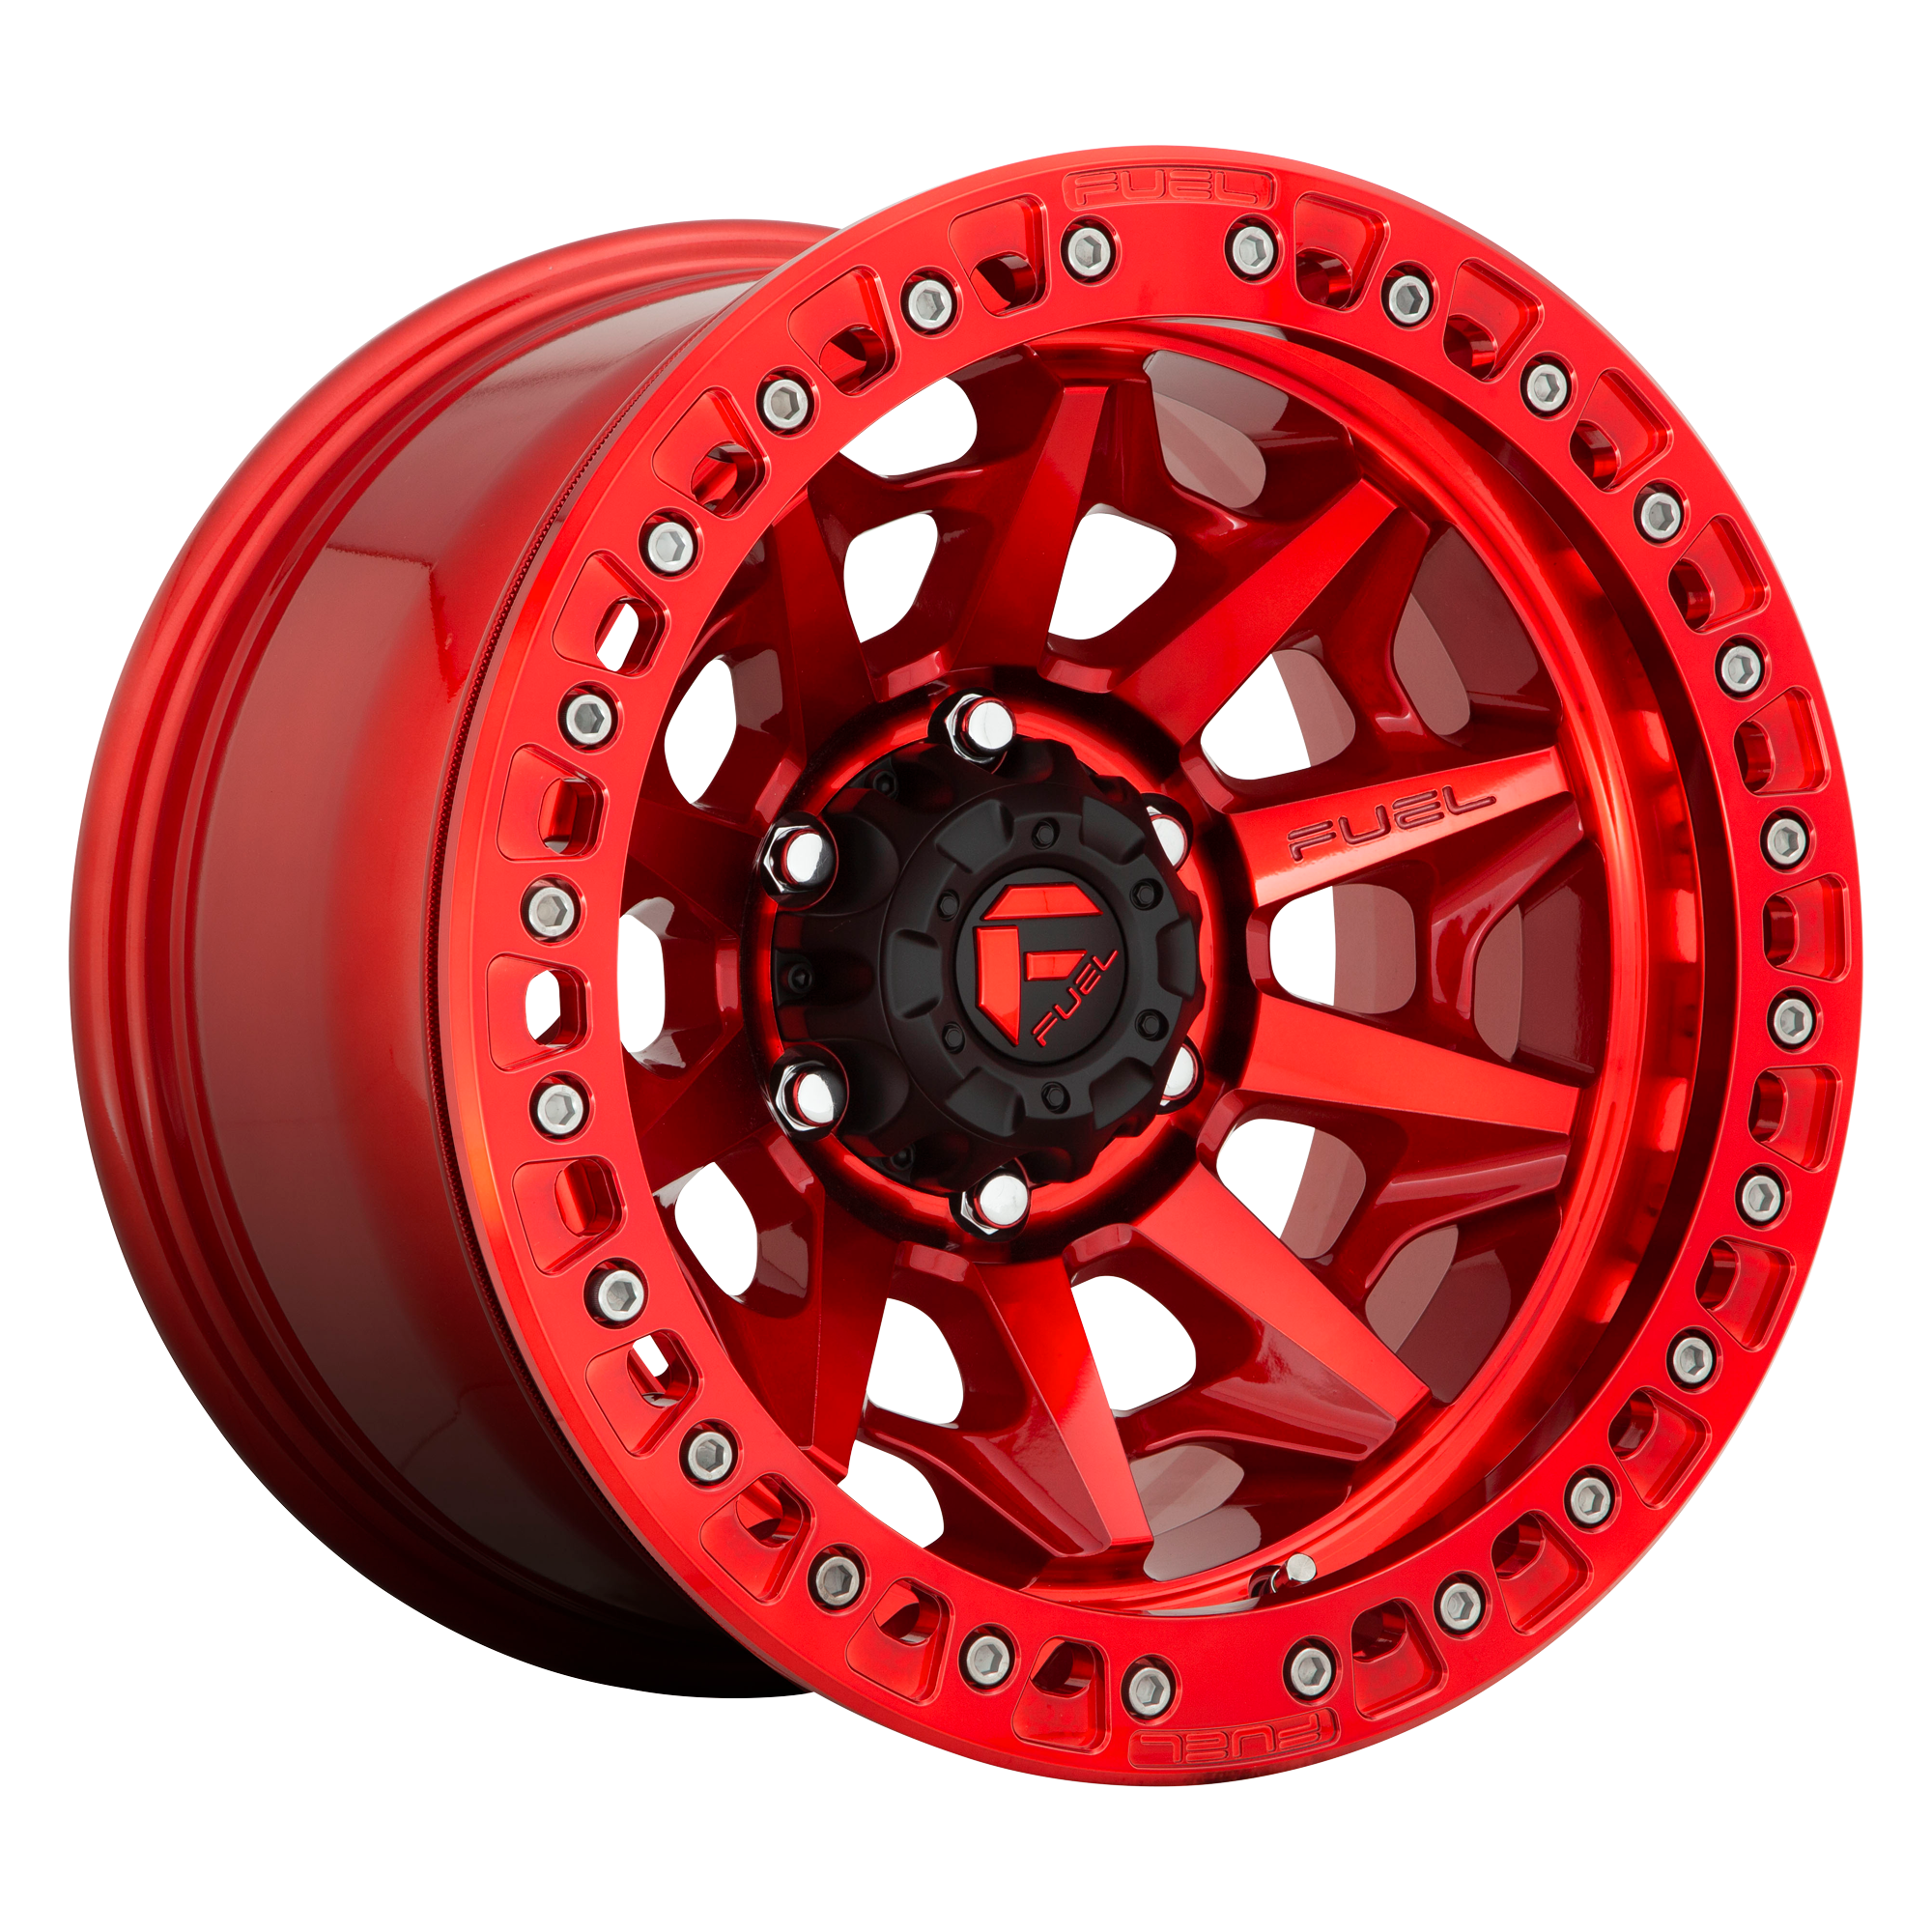 COVERT BL - OFF ROAD ONLY 17x9 5x127.00 CANDY RED (-15 mm) - Tires and Engine Performance